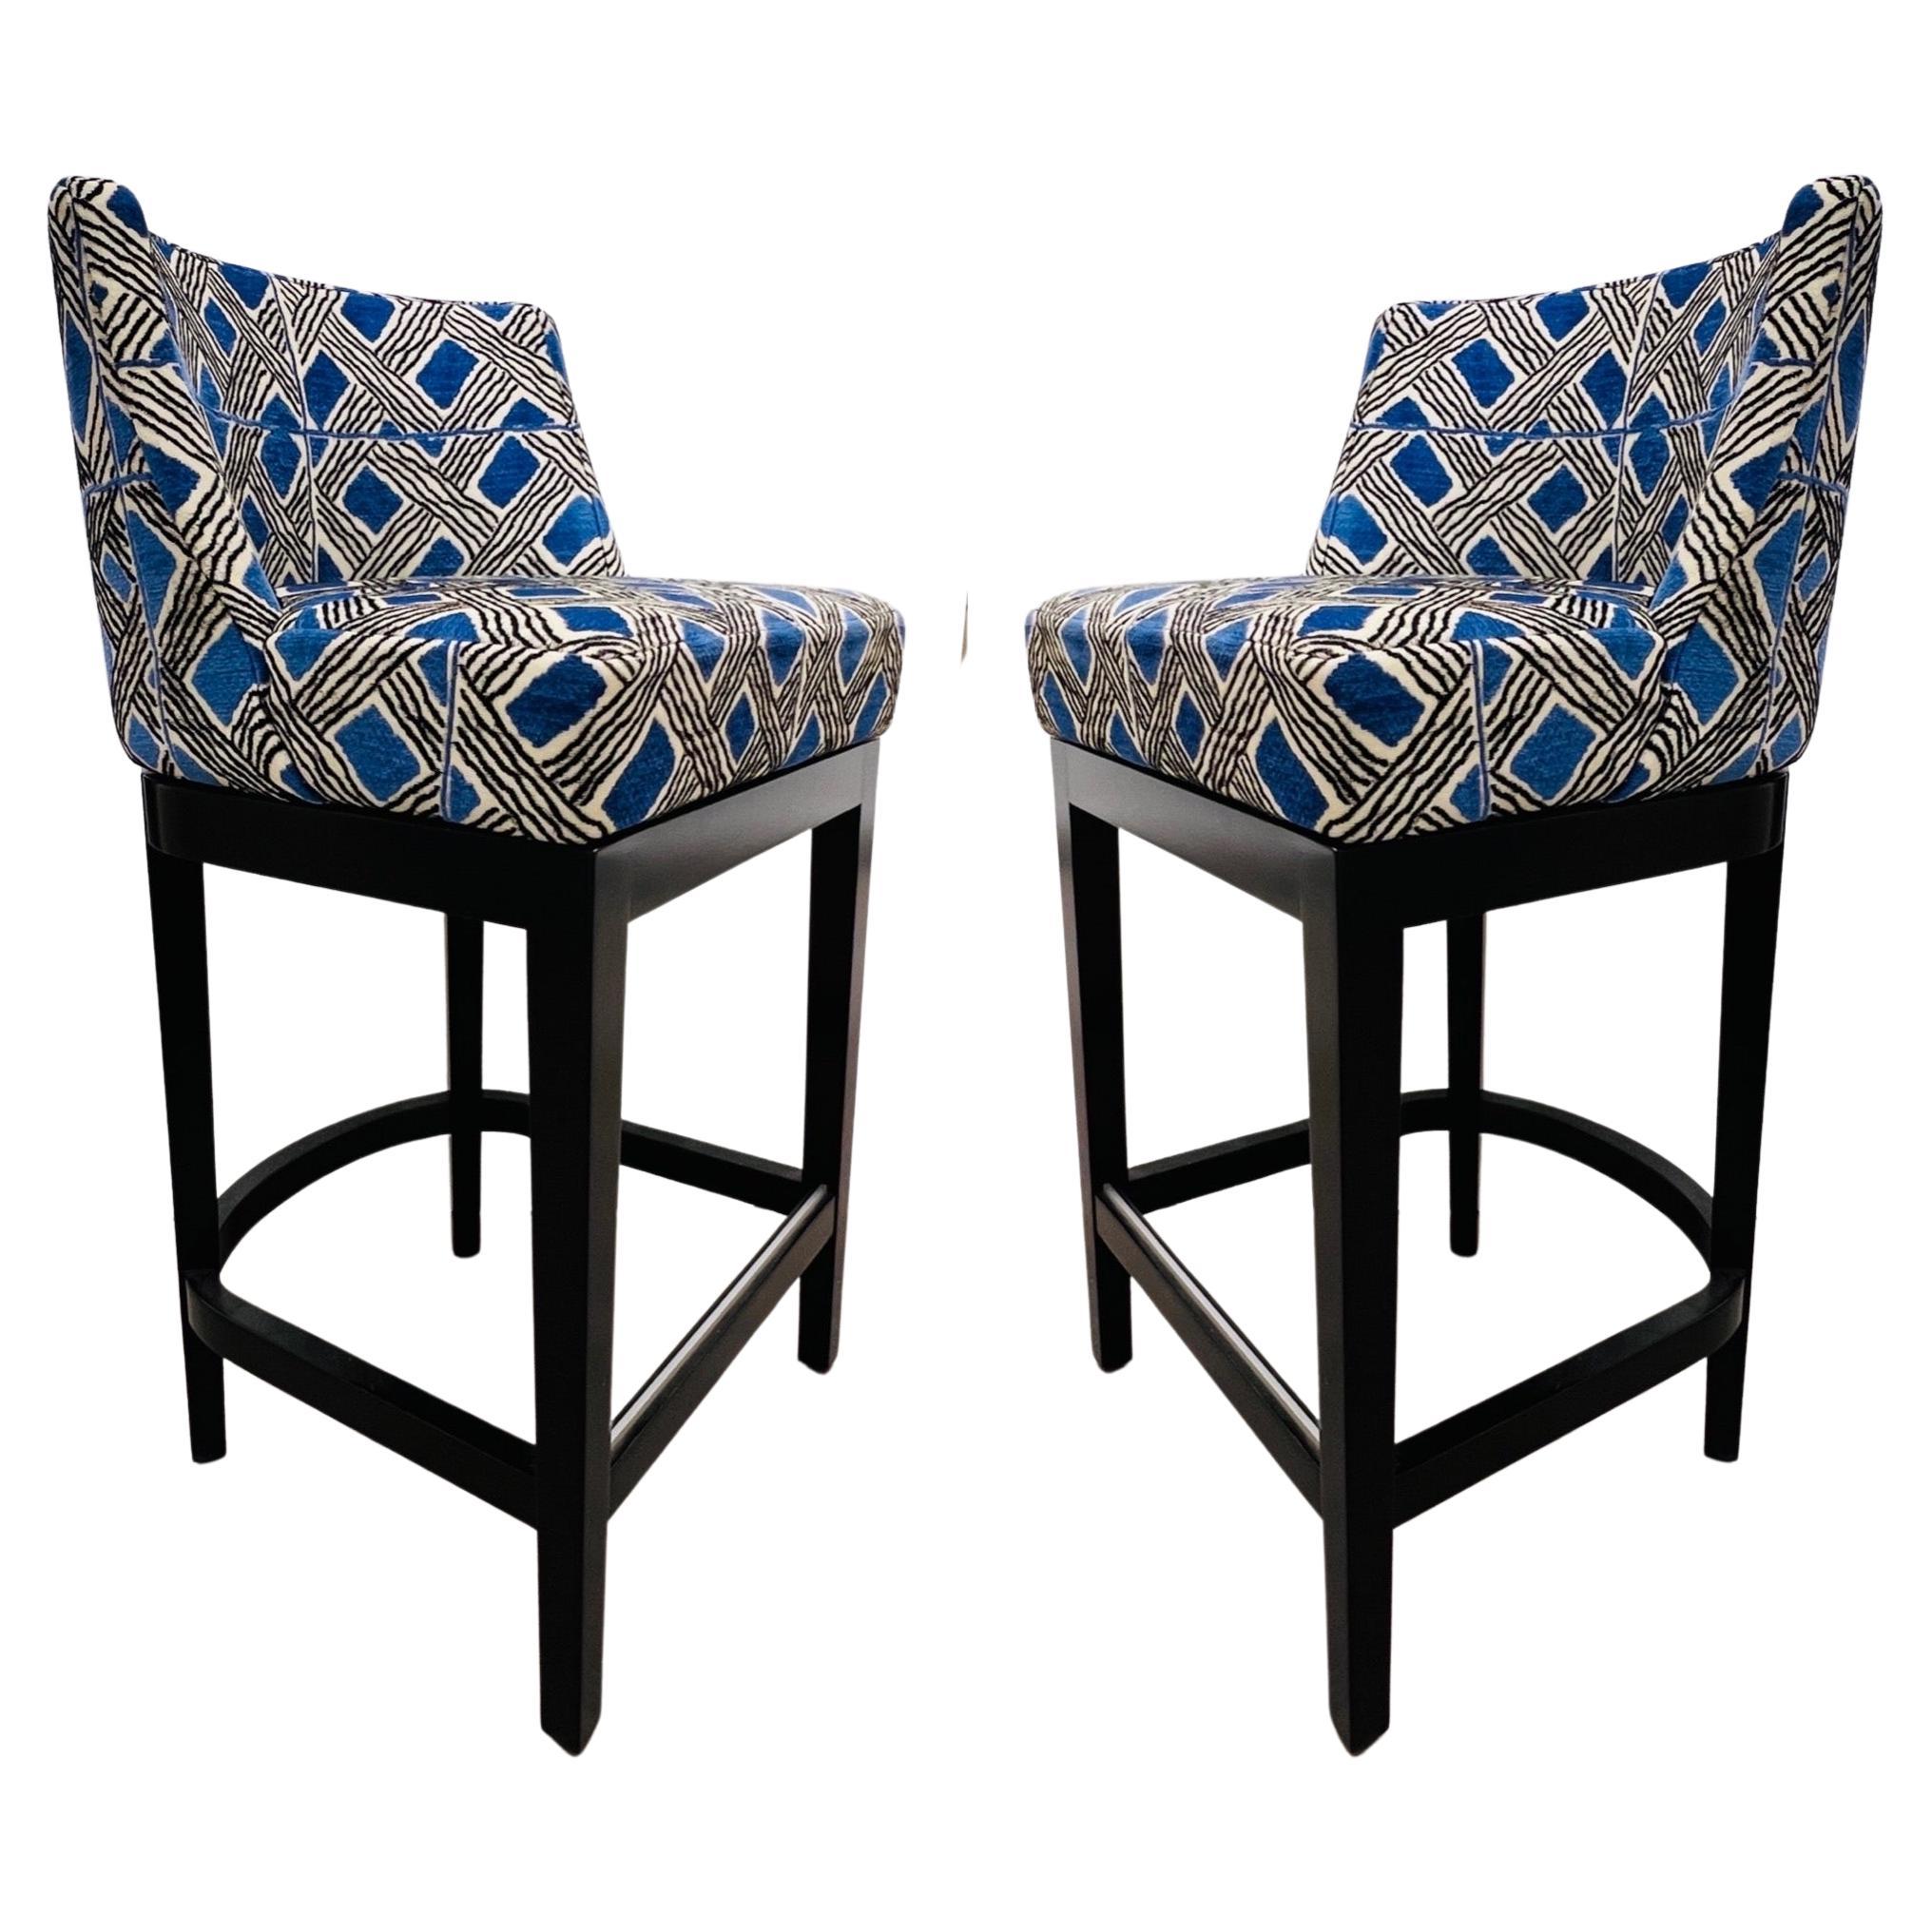 Pair of counter bar stools by La Maison Pierre Frey.  Mid-Century Modern design featuring swivel seats with curved backs.  Upholstered in Behanzin fabric, a woven chenille with geometric tribal patterns in blue and black over a beige ground.  Woven